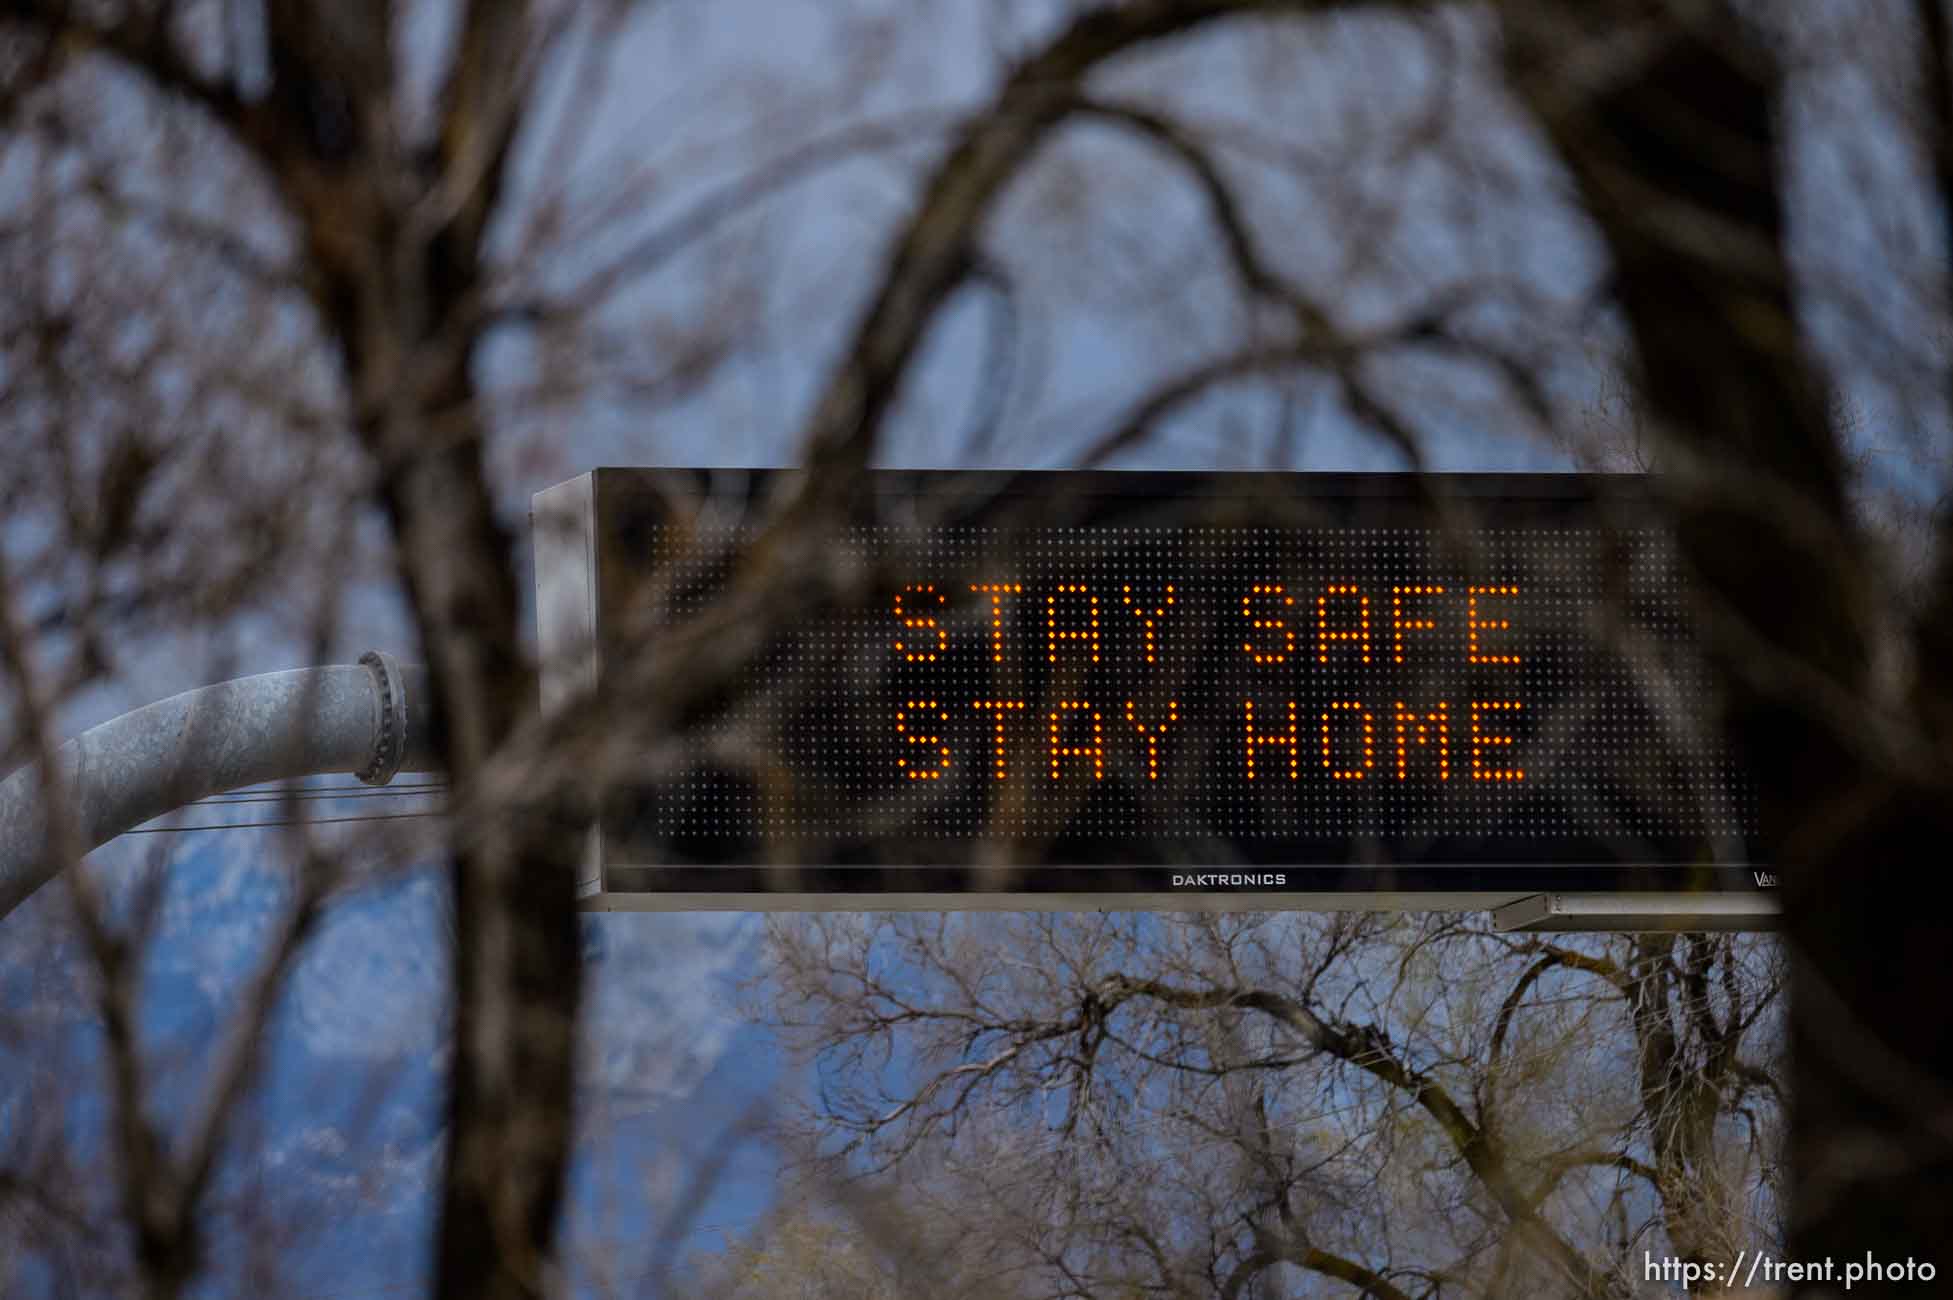 Stay Safe Stay Home